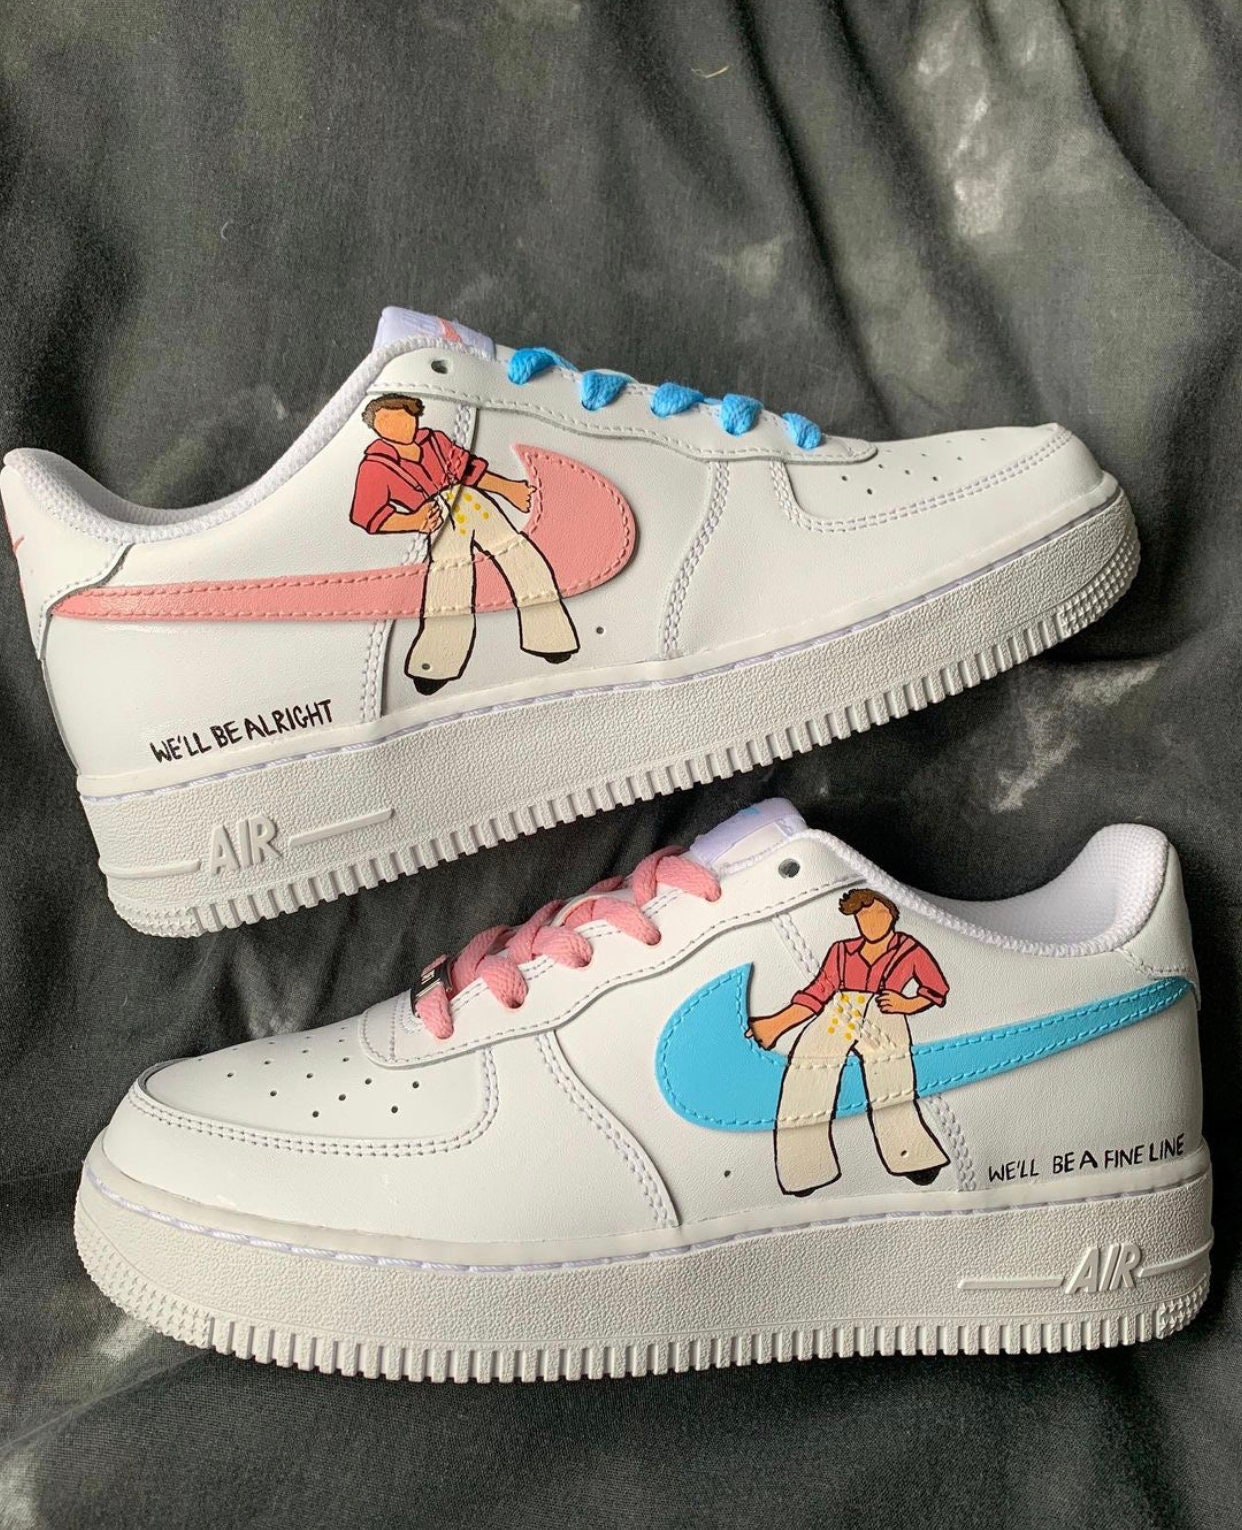 Harry Styles Inspired Air Force 1s | vlr.eng.br